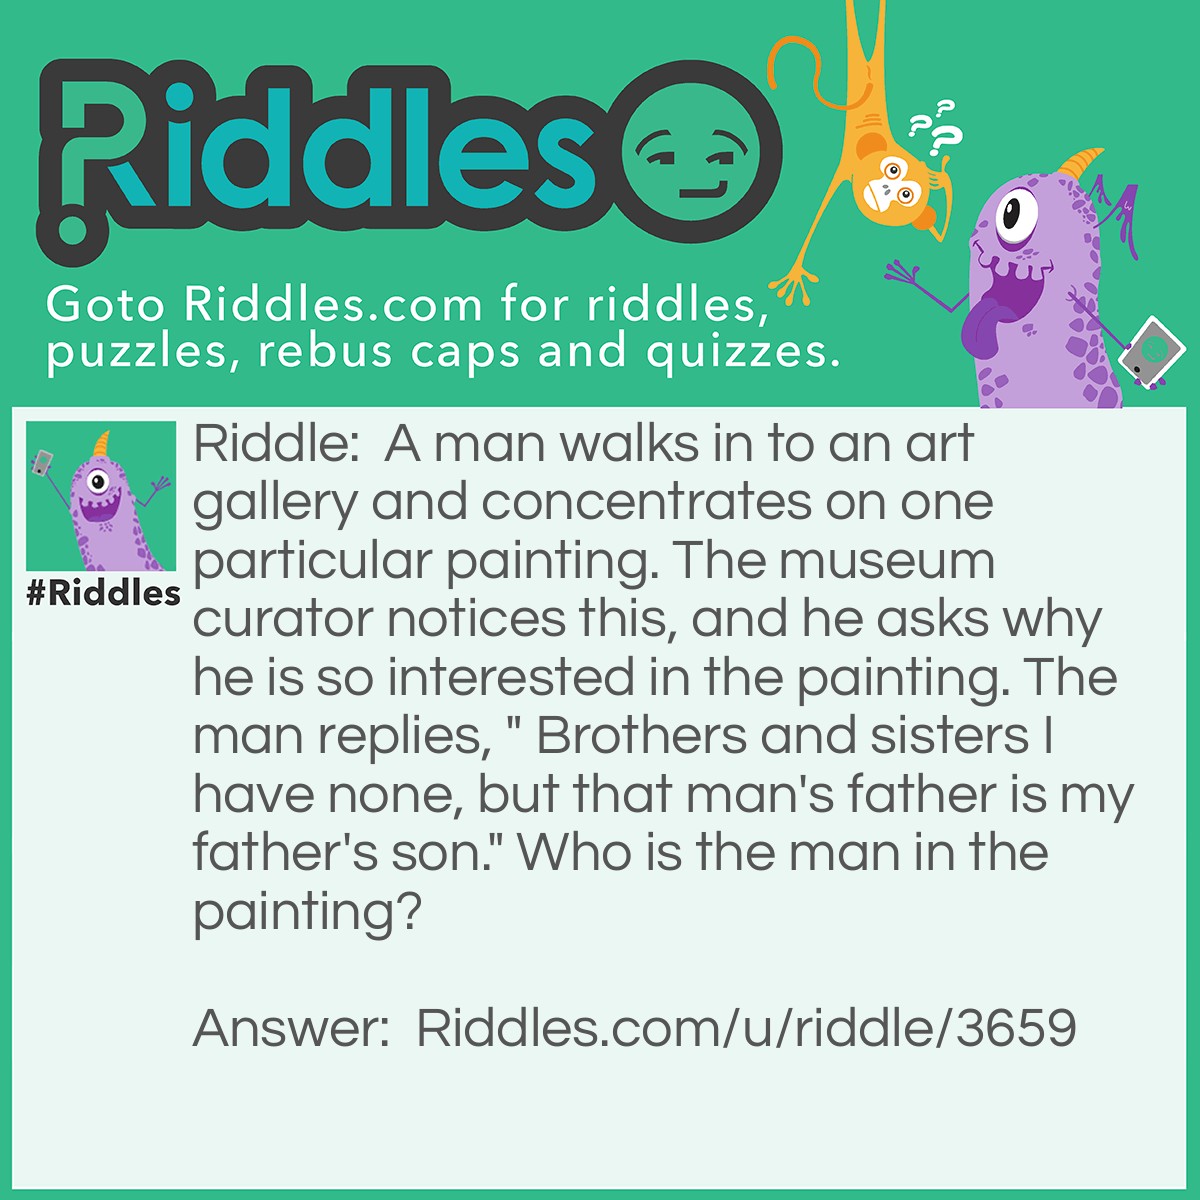 Riddle: A man walks in to an art gallery and concentrates on one particular painting. The museum curator notices this, and he asks why he is so interested in the painting. The man replies, " Brothers and sisters I have none, but that man's father is my father's son." Who is the man in the painting? Answer: His son.